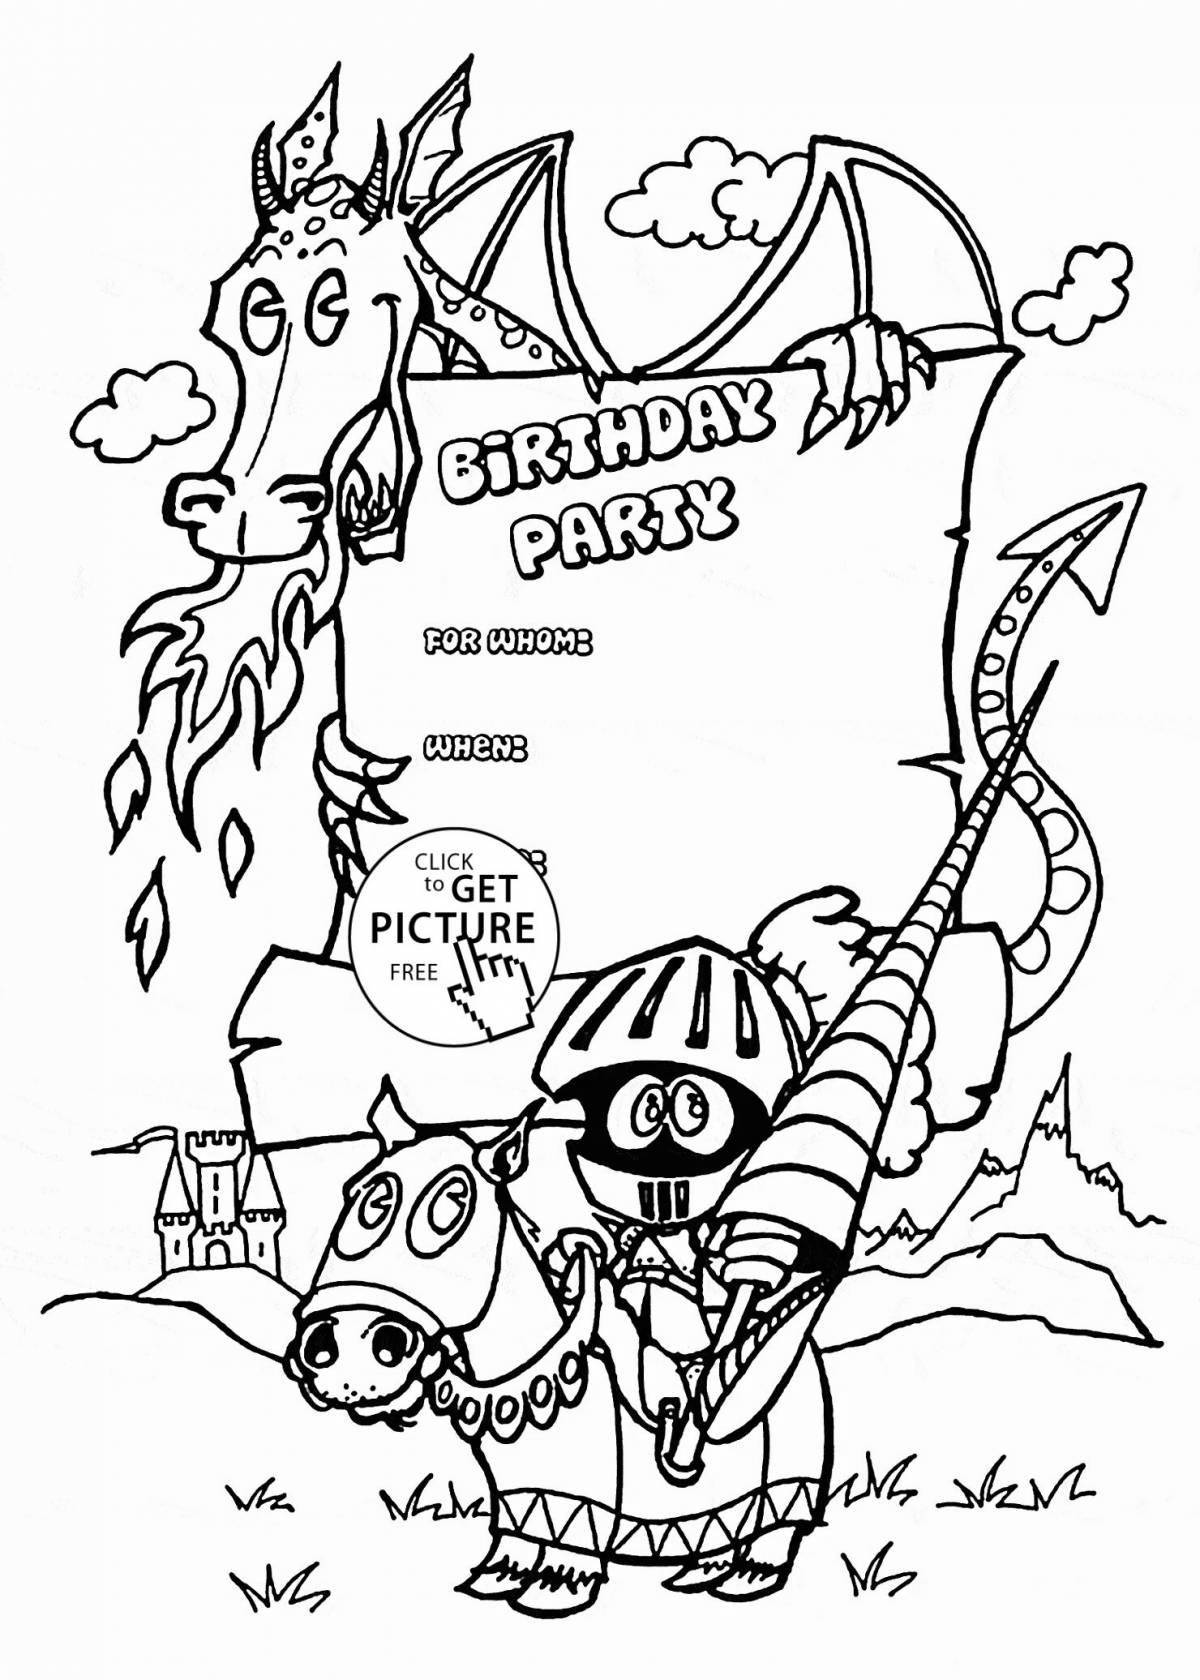 Glitter birthday invitation coloring page for girls